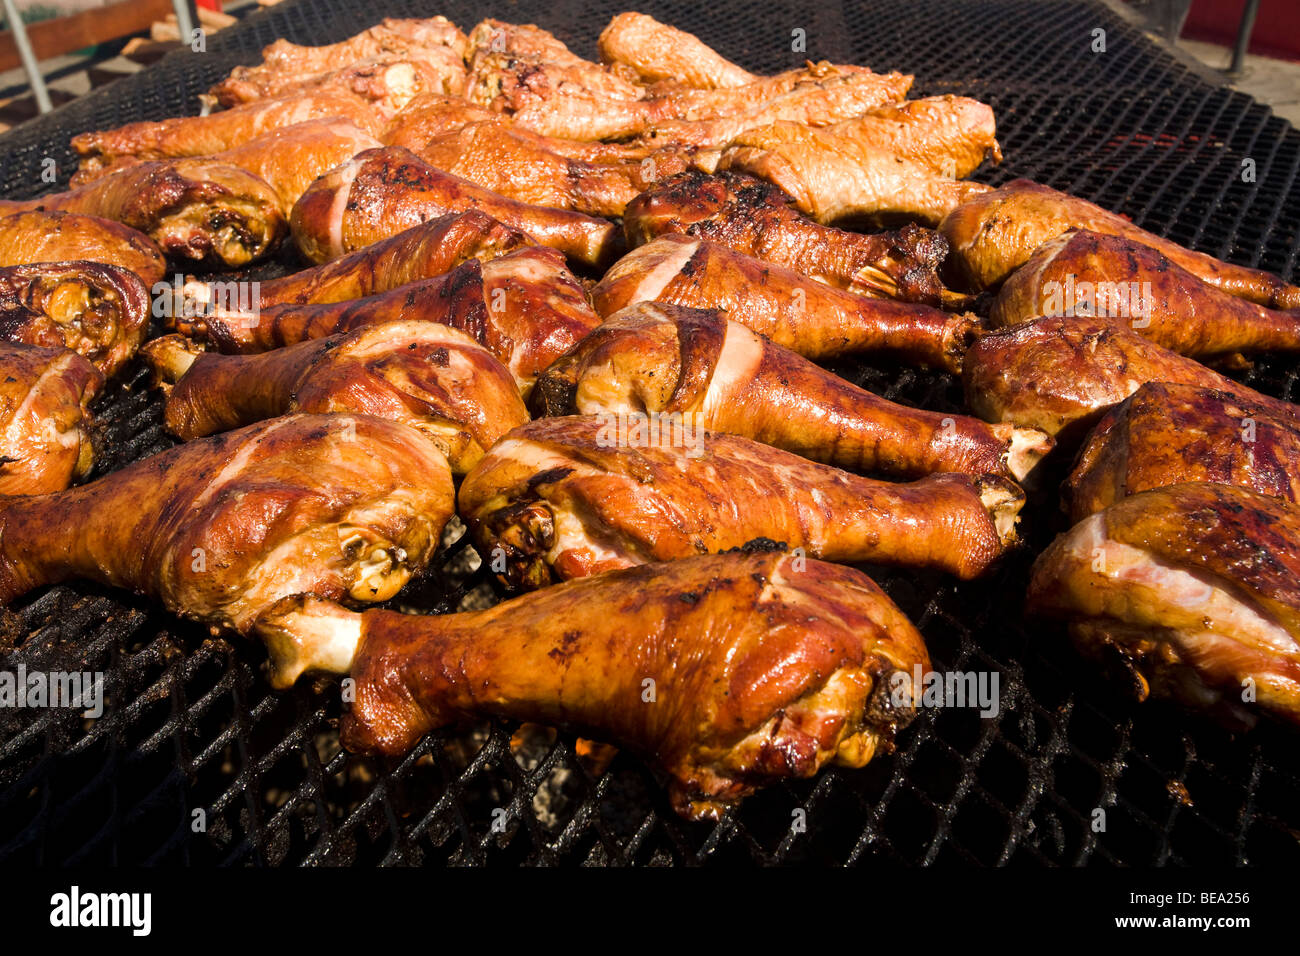 Meat on the barbeque at a food stand at the Los Angeles County Fair (2009) Pomona Fairplex Pomona, California, United States of America Stock Photo